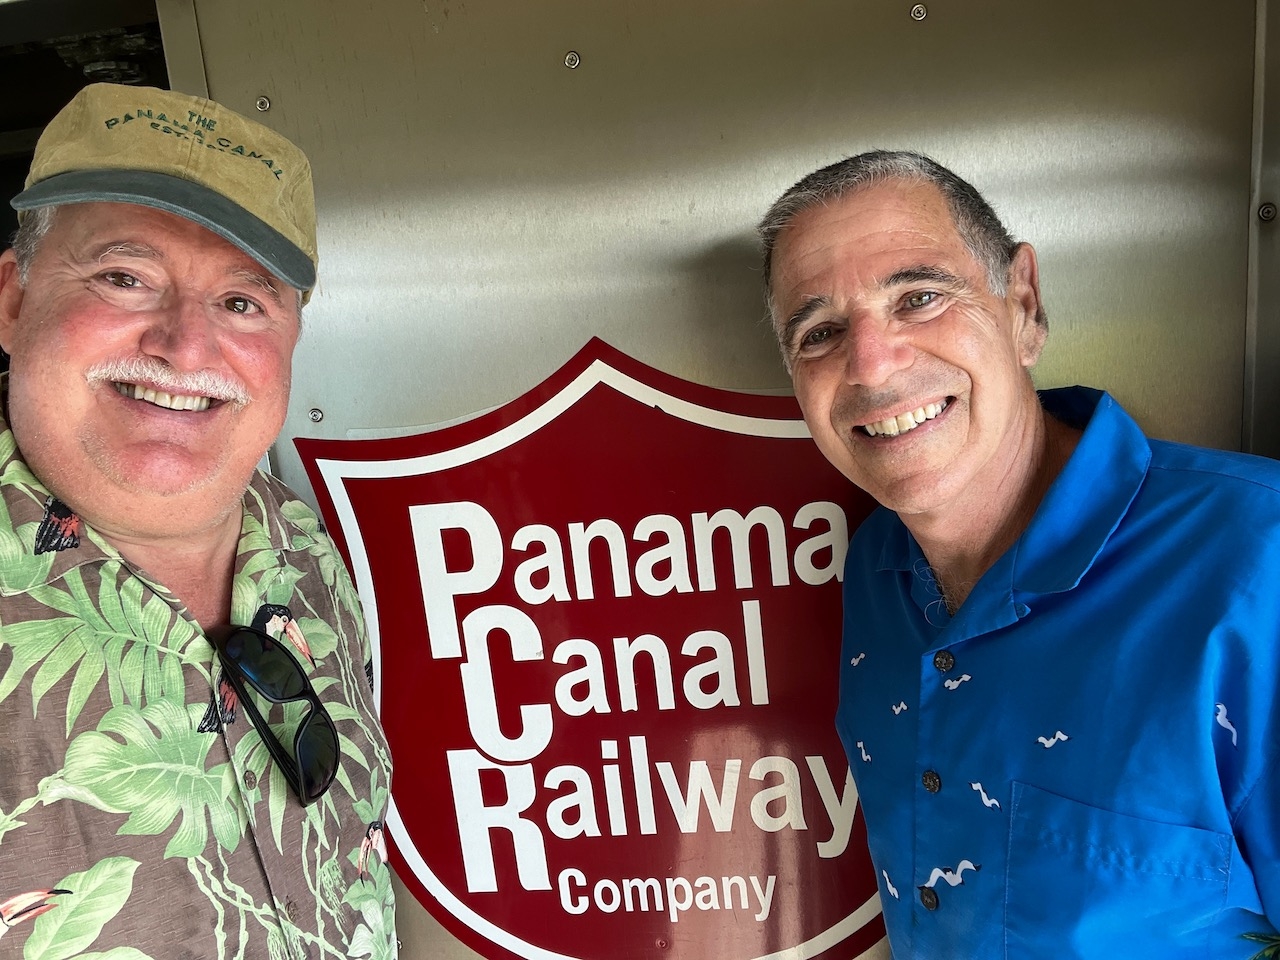 Train Excursion on The Panama Canal Railway!